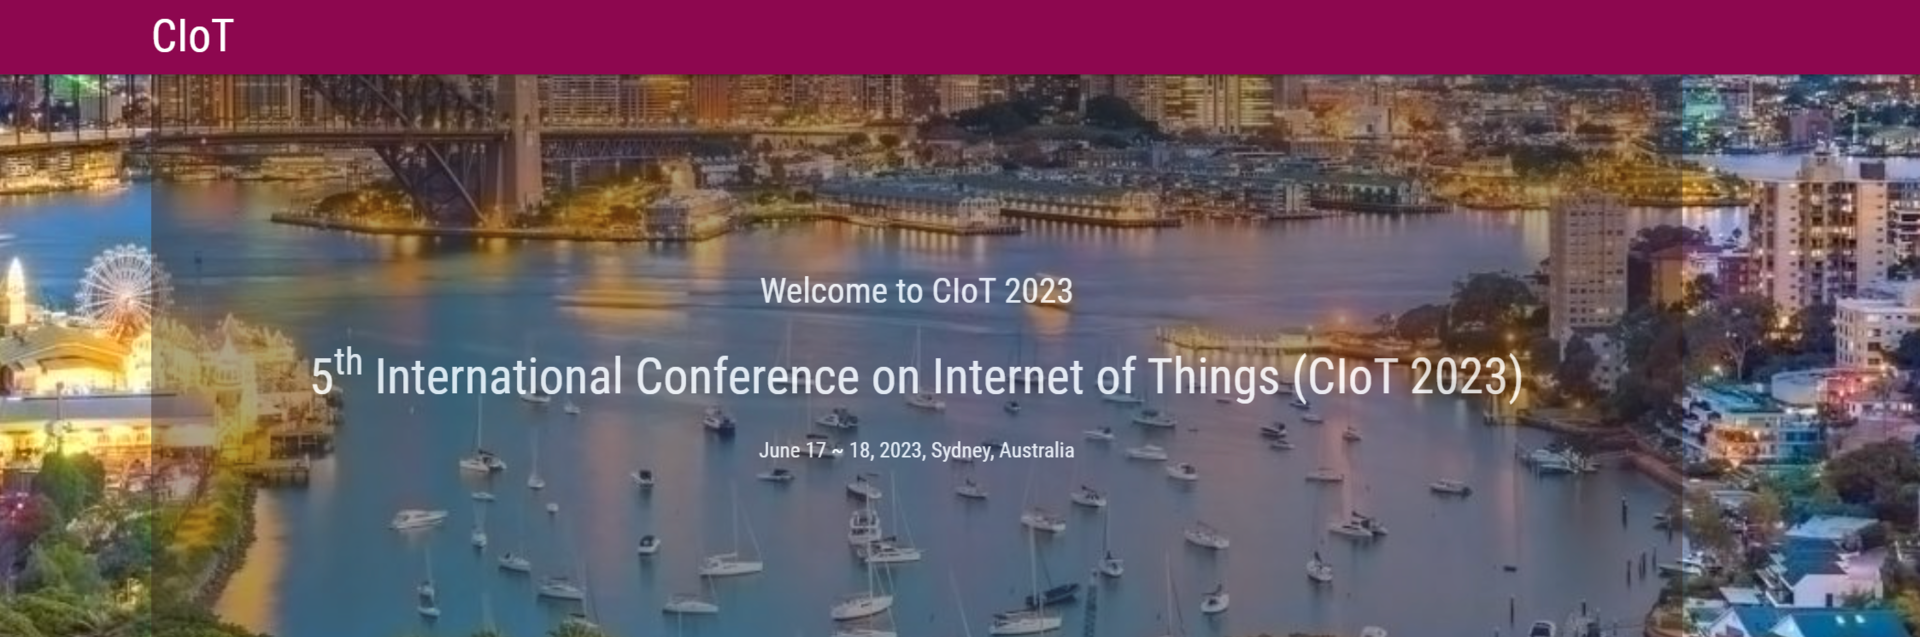 5th International Conference on Internet of Things (CIoT 2023)